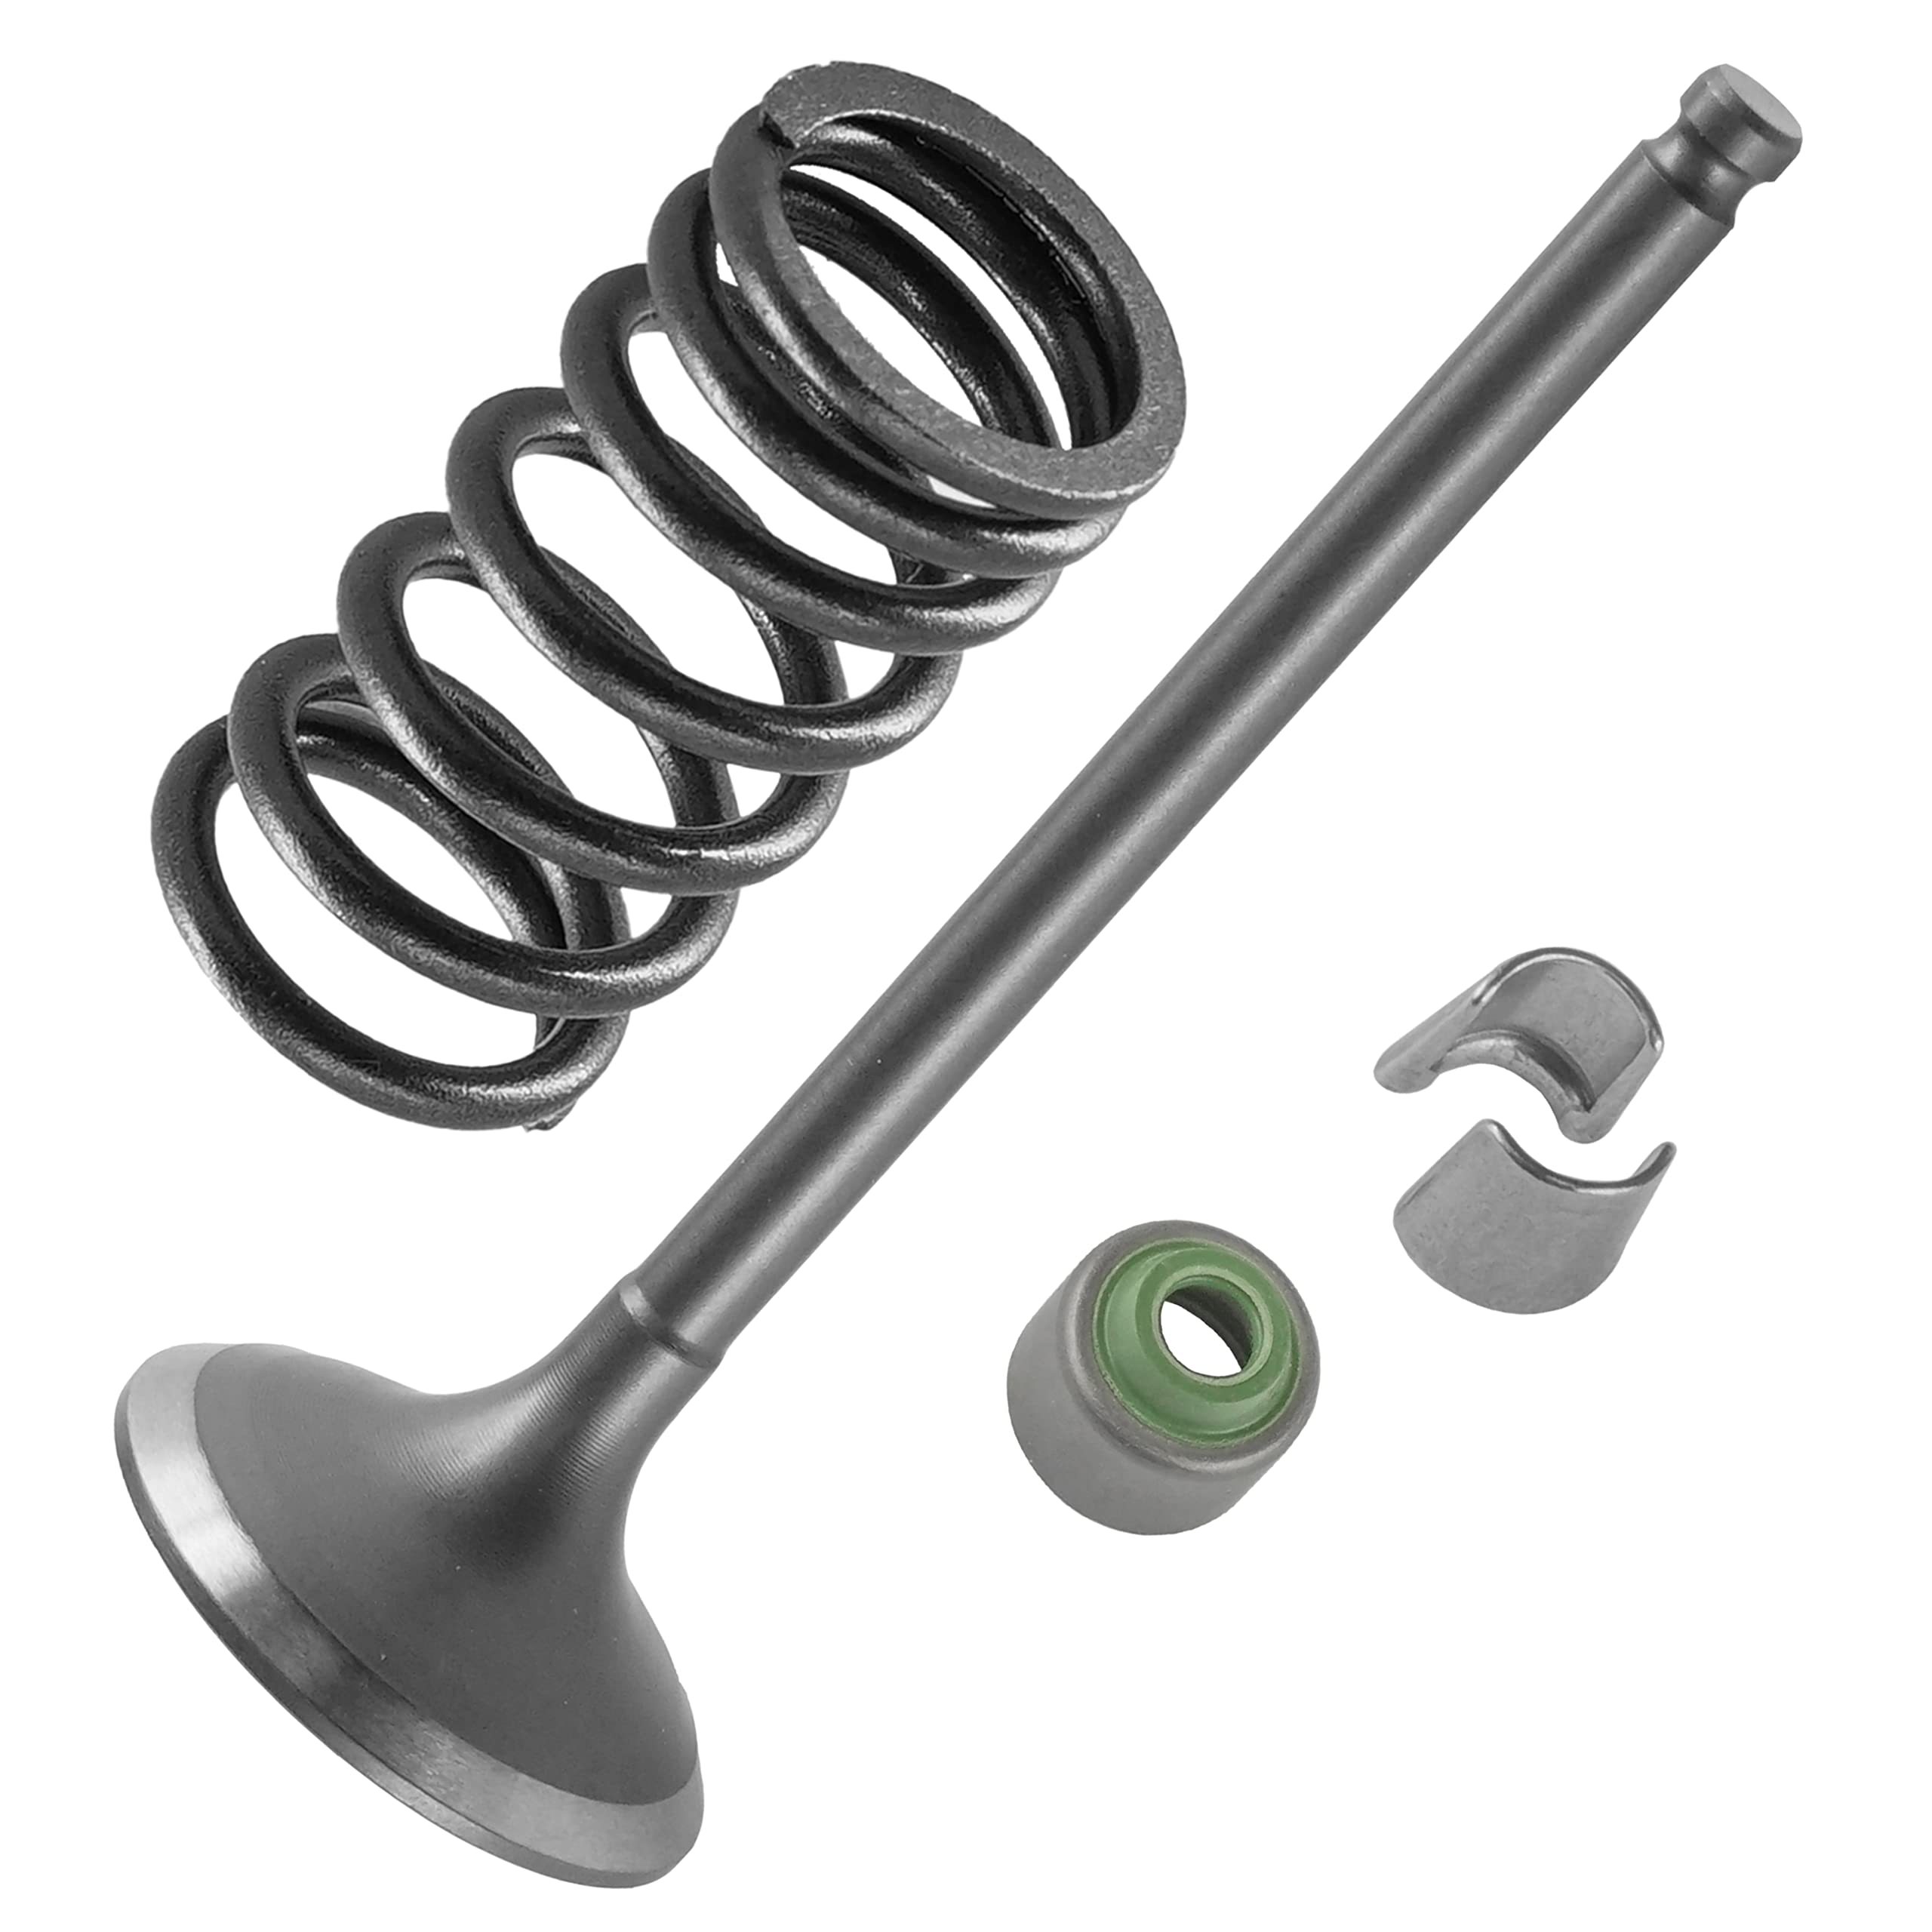 Caltric Intake Valve Kit compatible with Yamaha YZ450F 2003 2004 2005 2006 2007 2008 2009